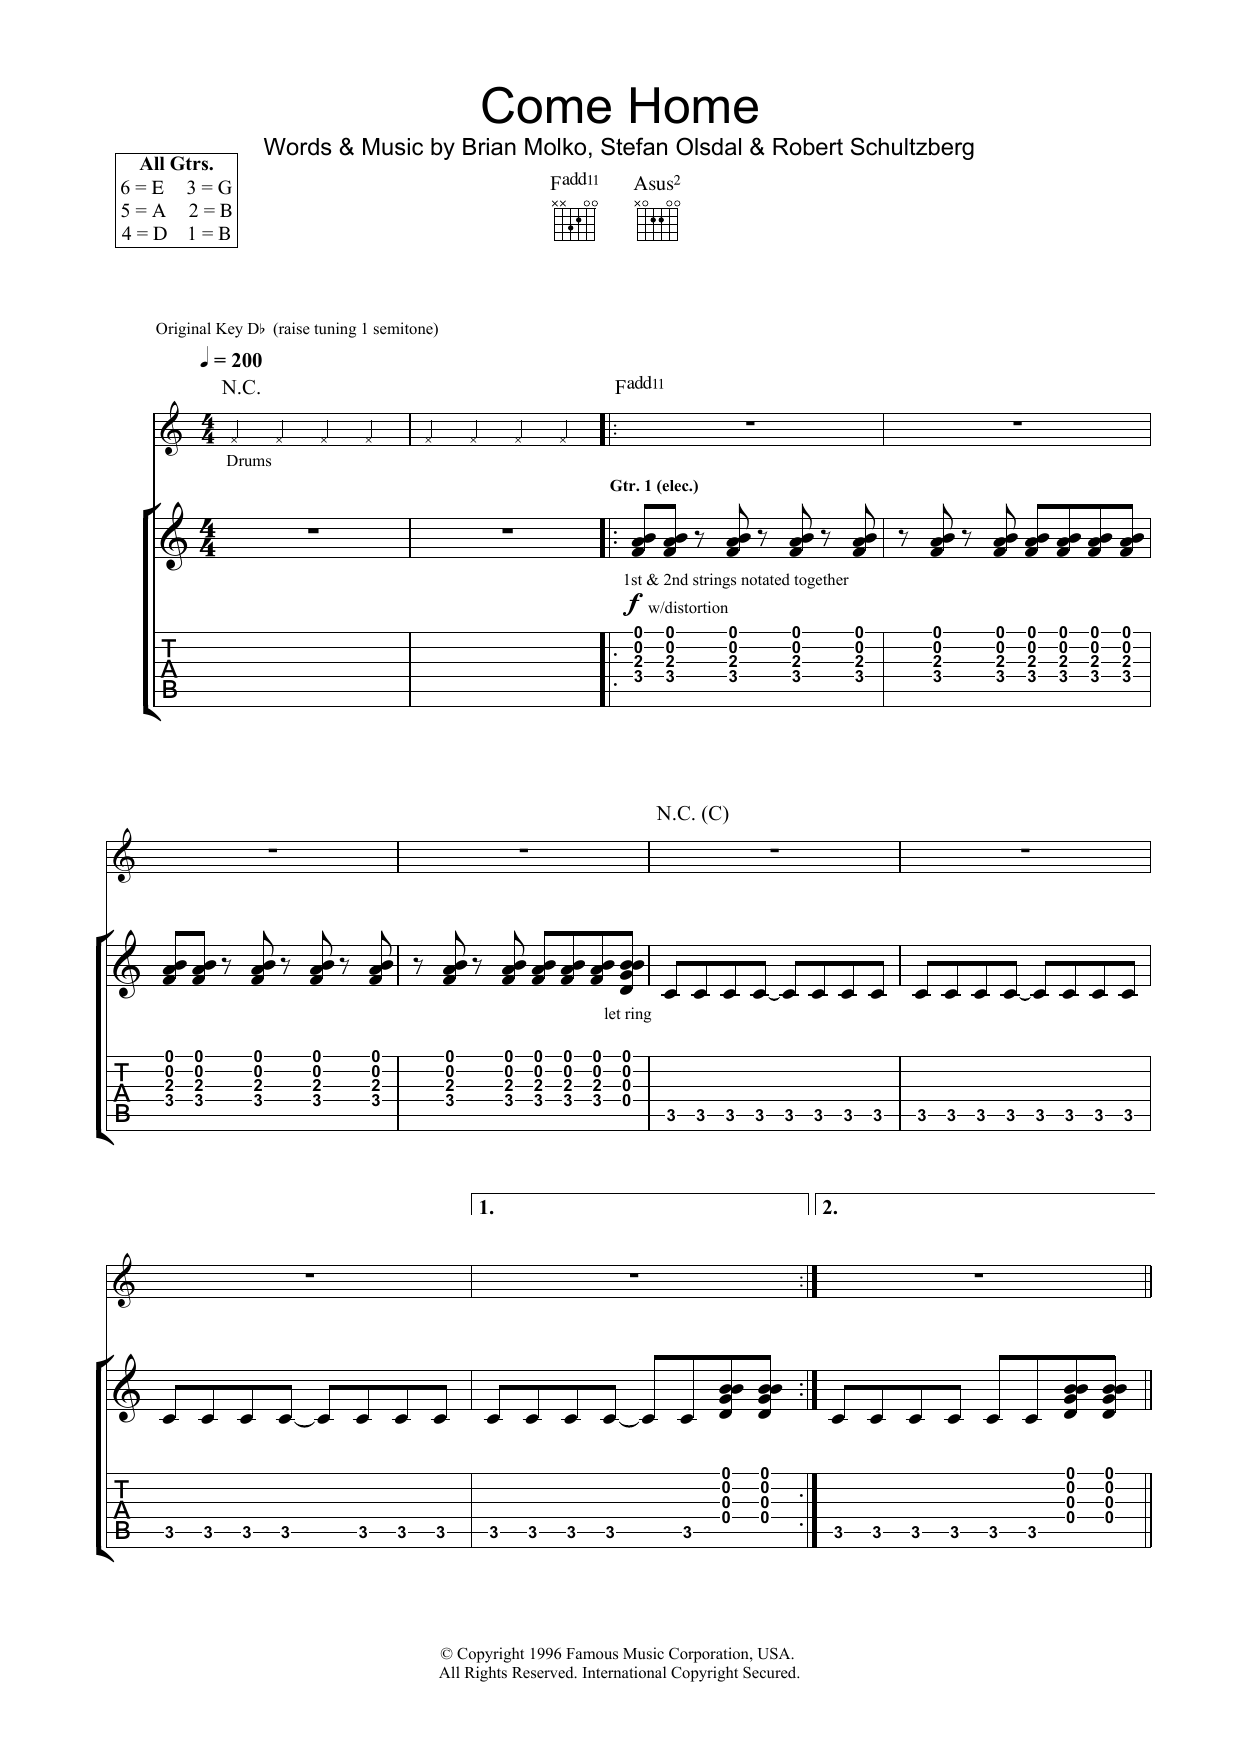 Download Placebo Come Home Sheet Music